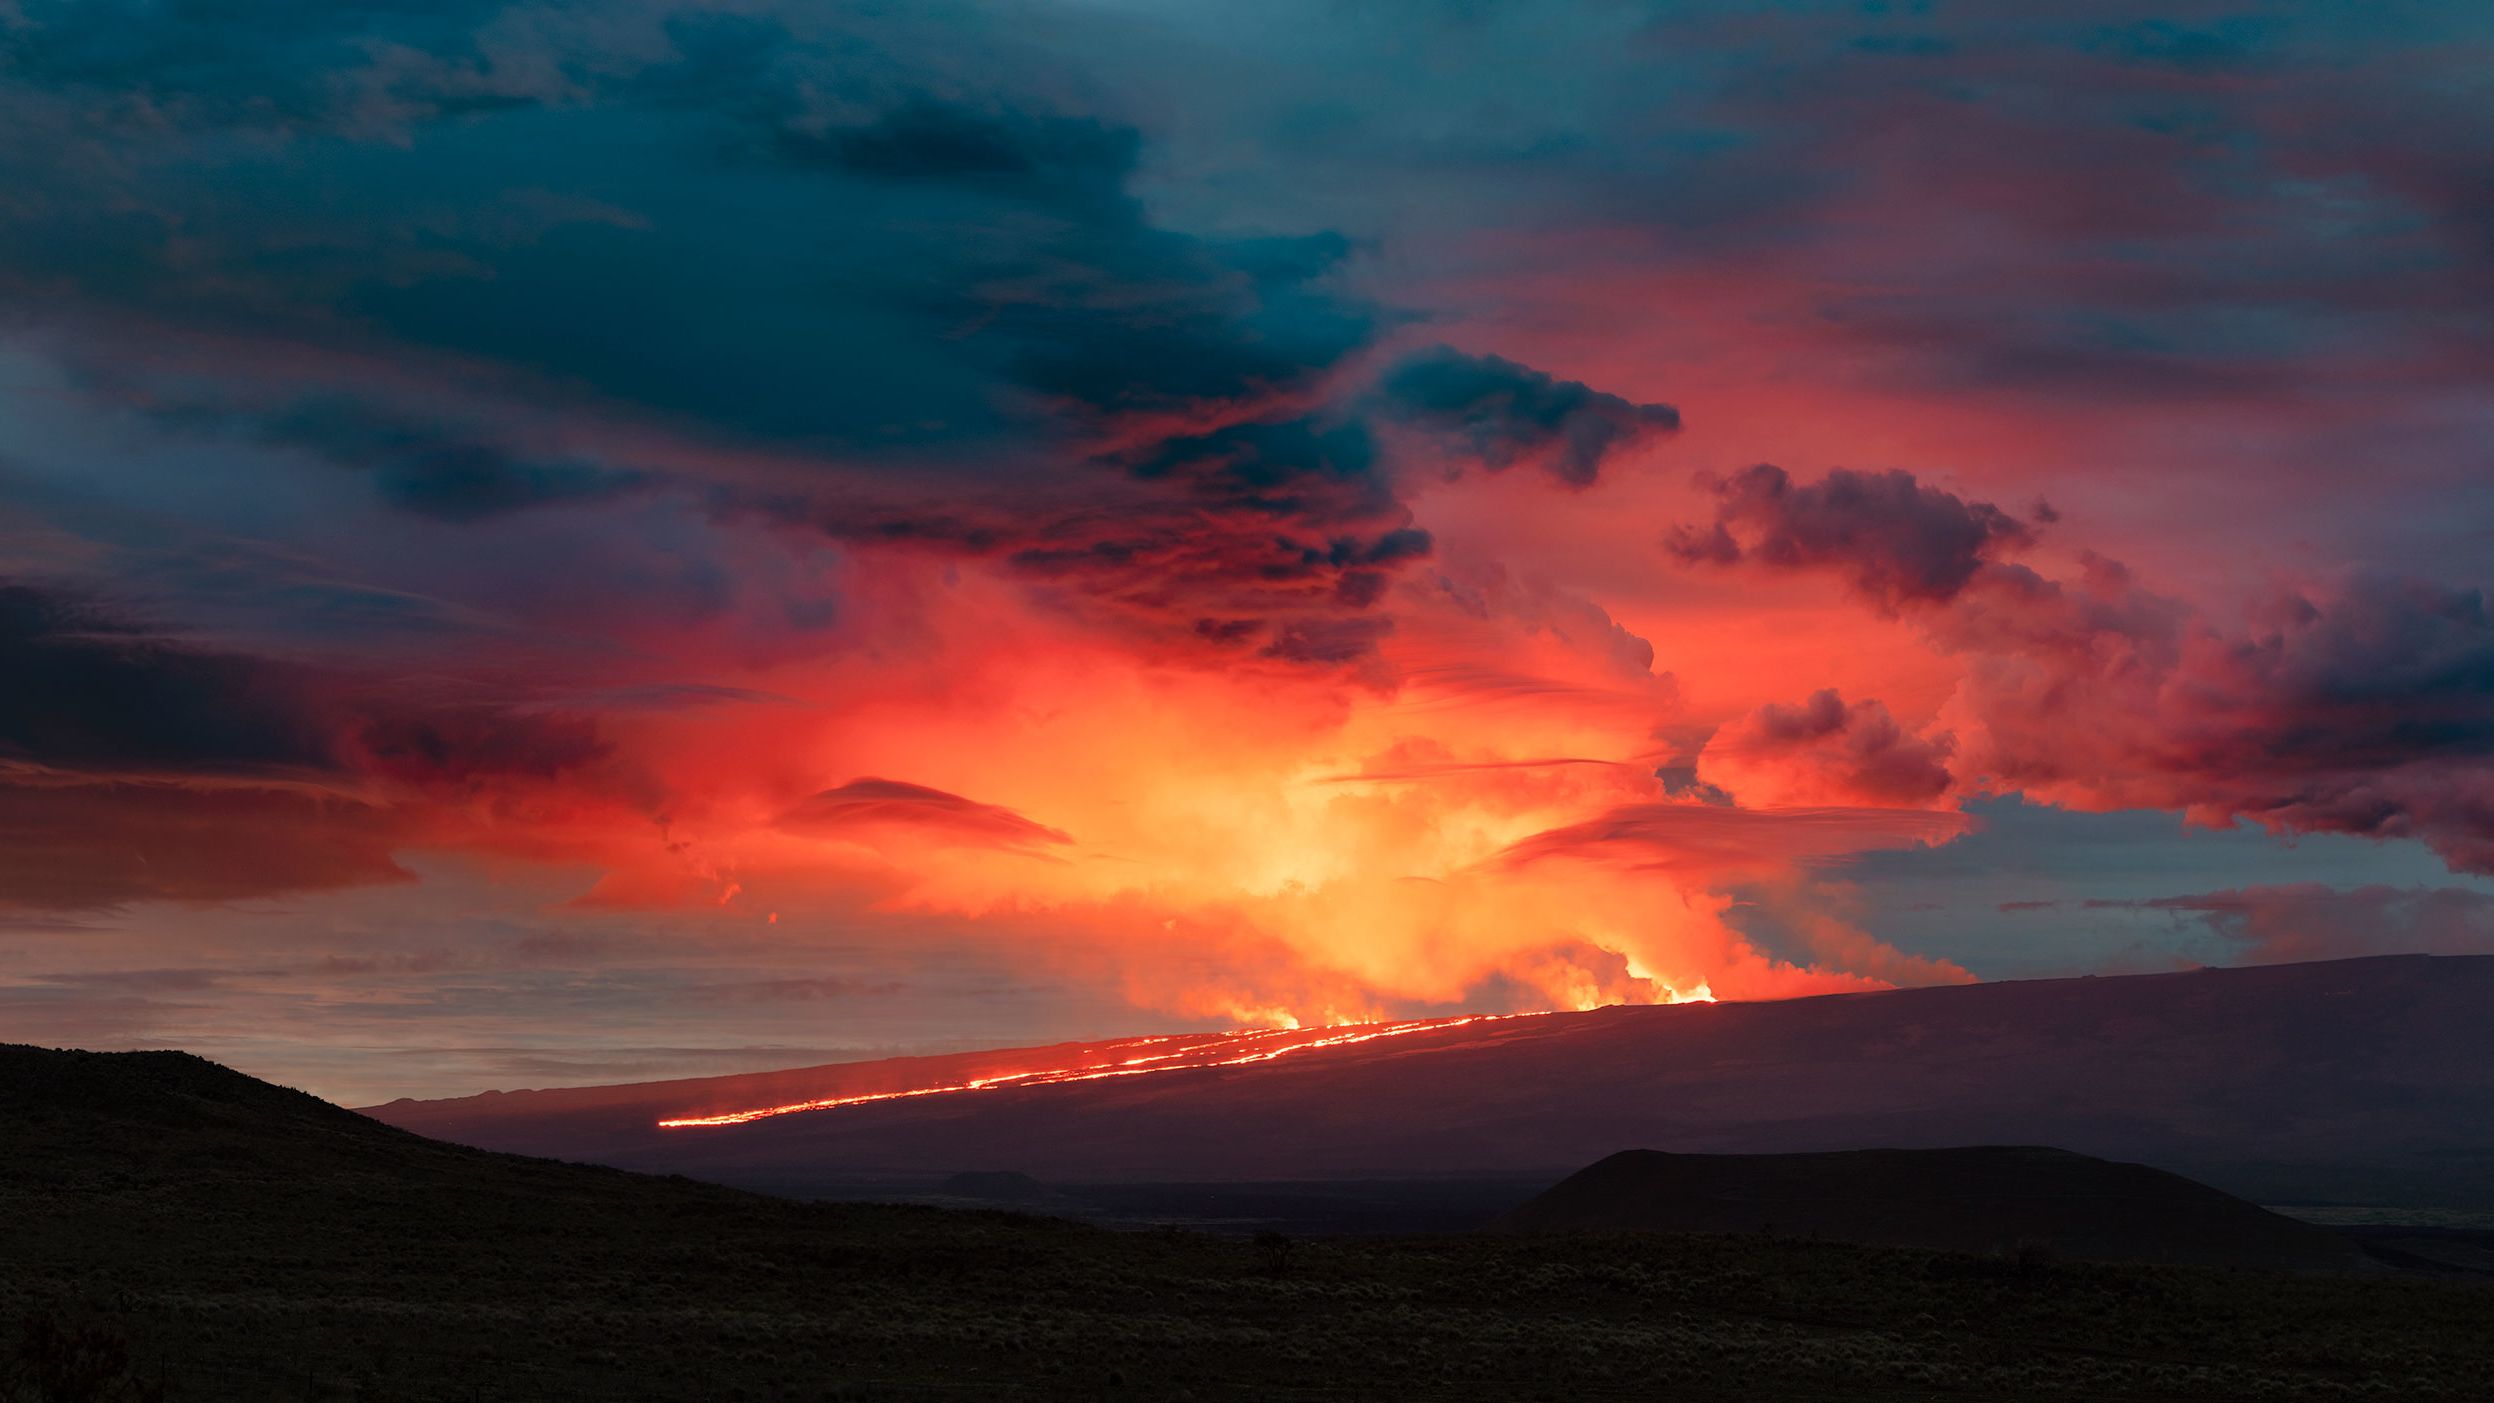 In a photograph by Kale, lava can be seen flowing from Mauna Loa on November 29. 